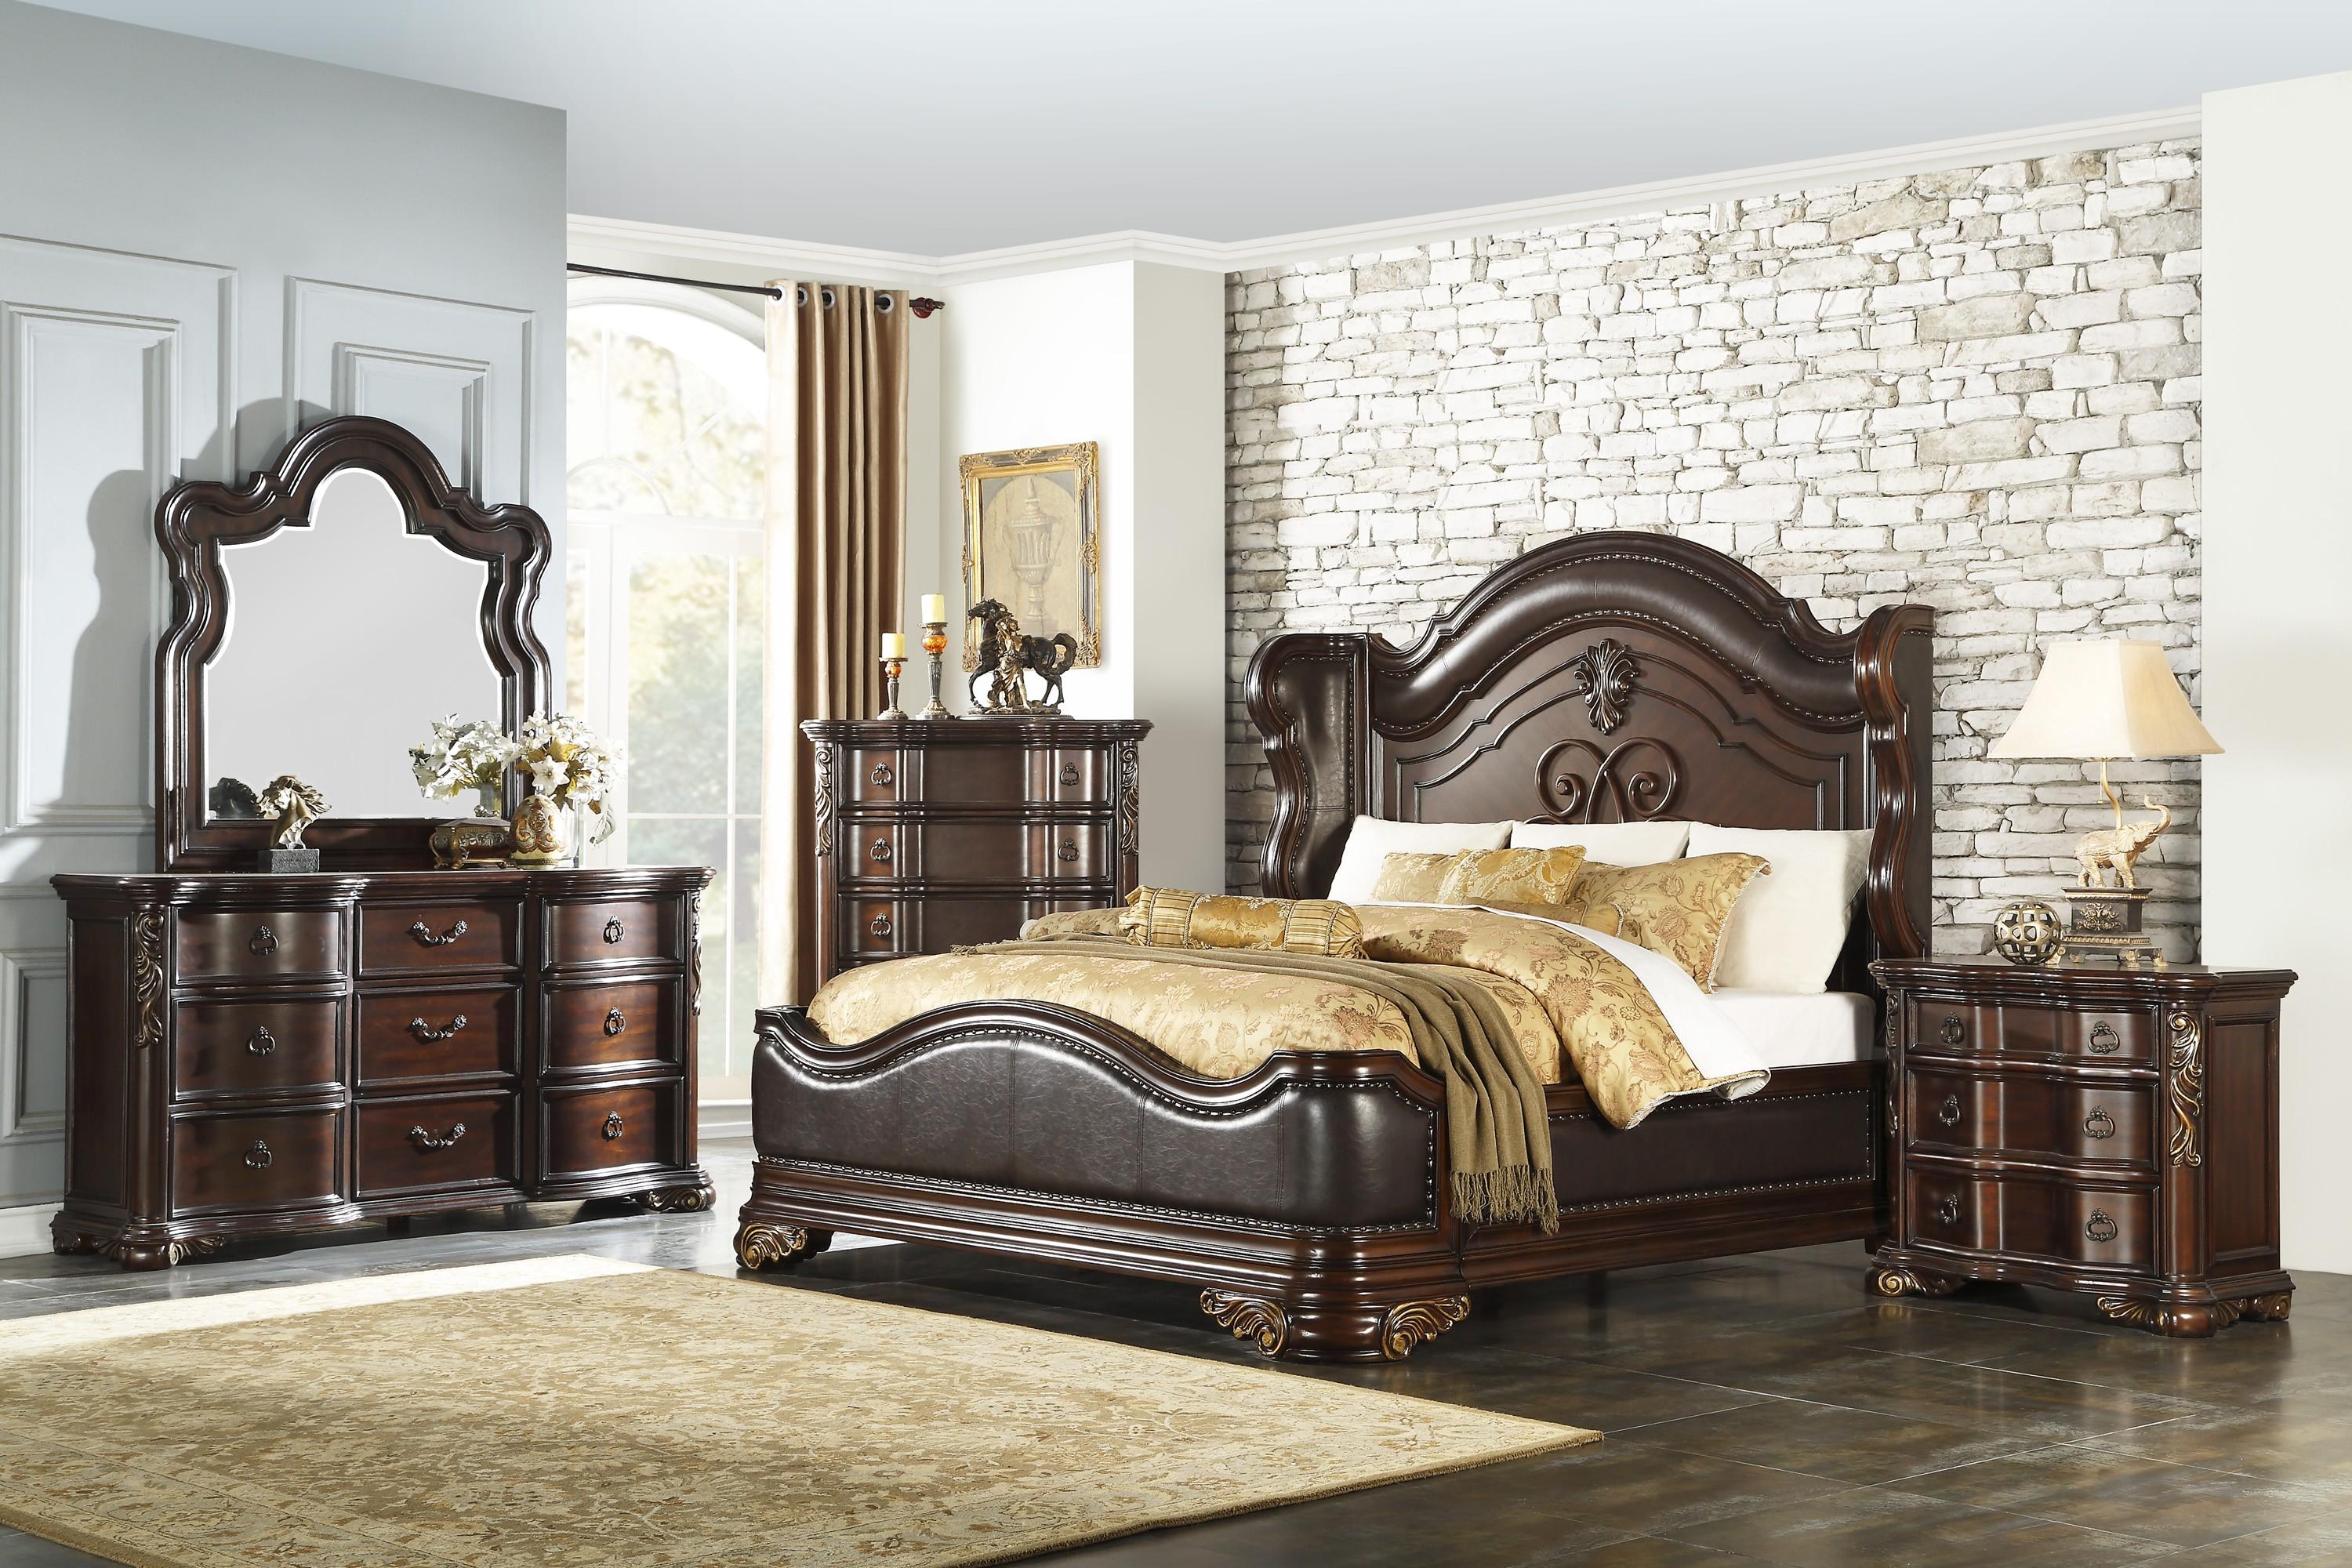 Traditional Bedroom Set 1603-1-6PC Royal Highlands 1603-1-6PC in Cherry Faux Leather